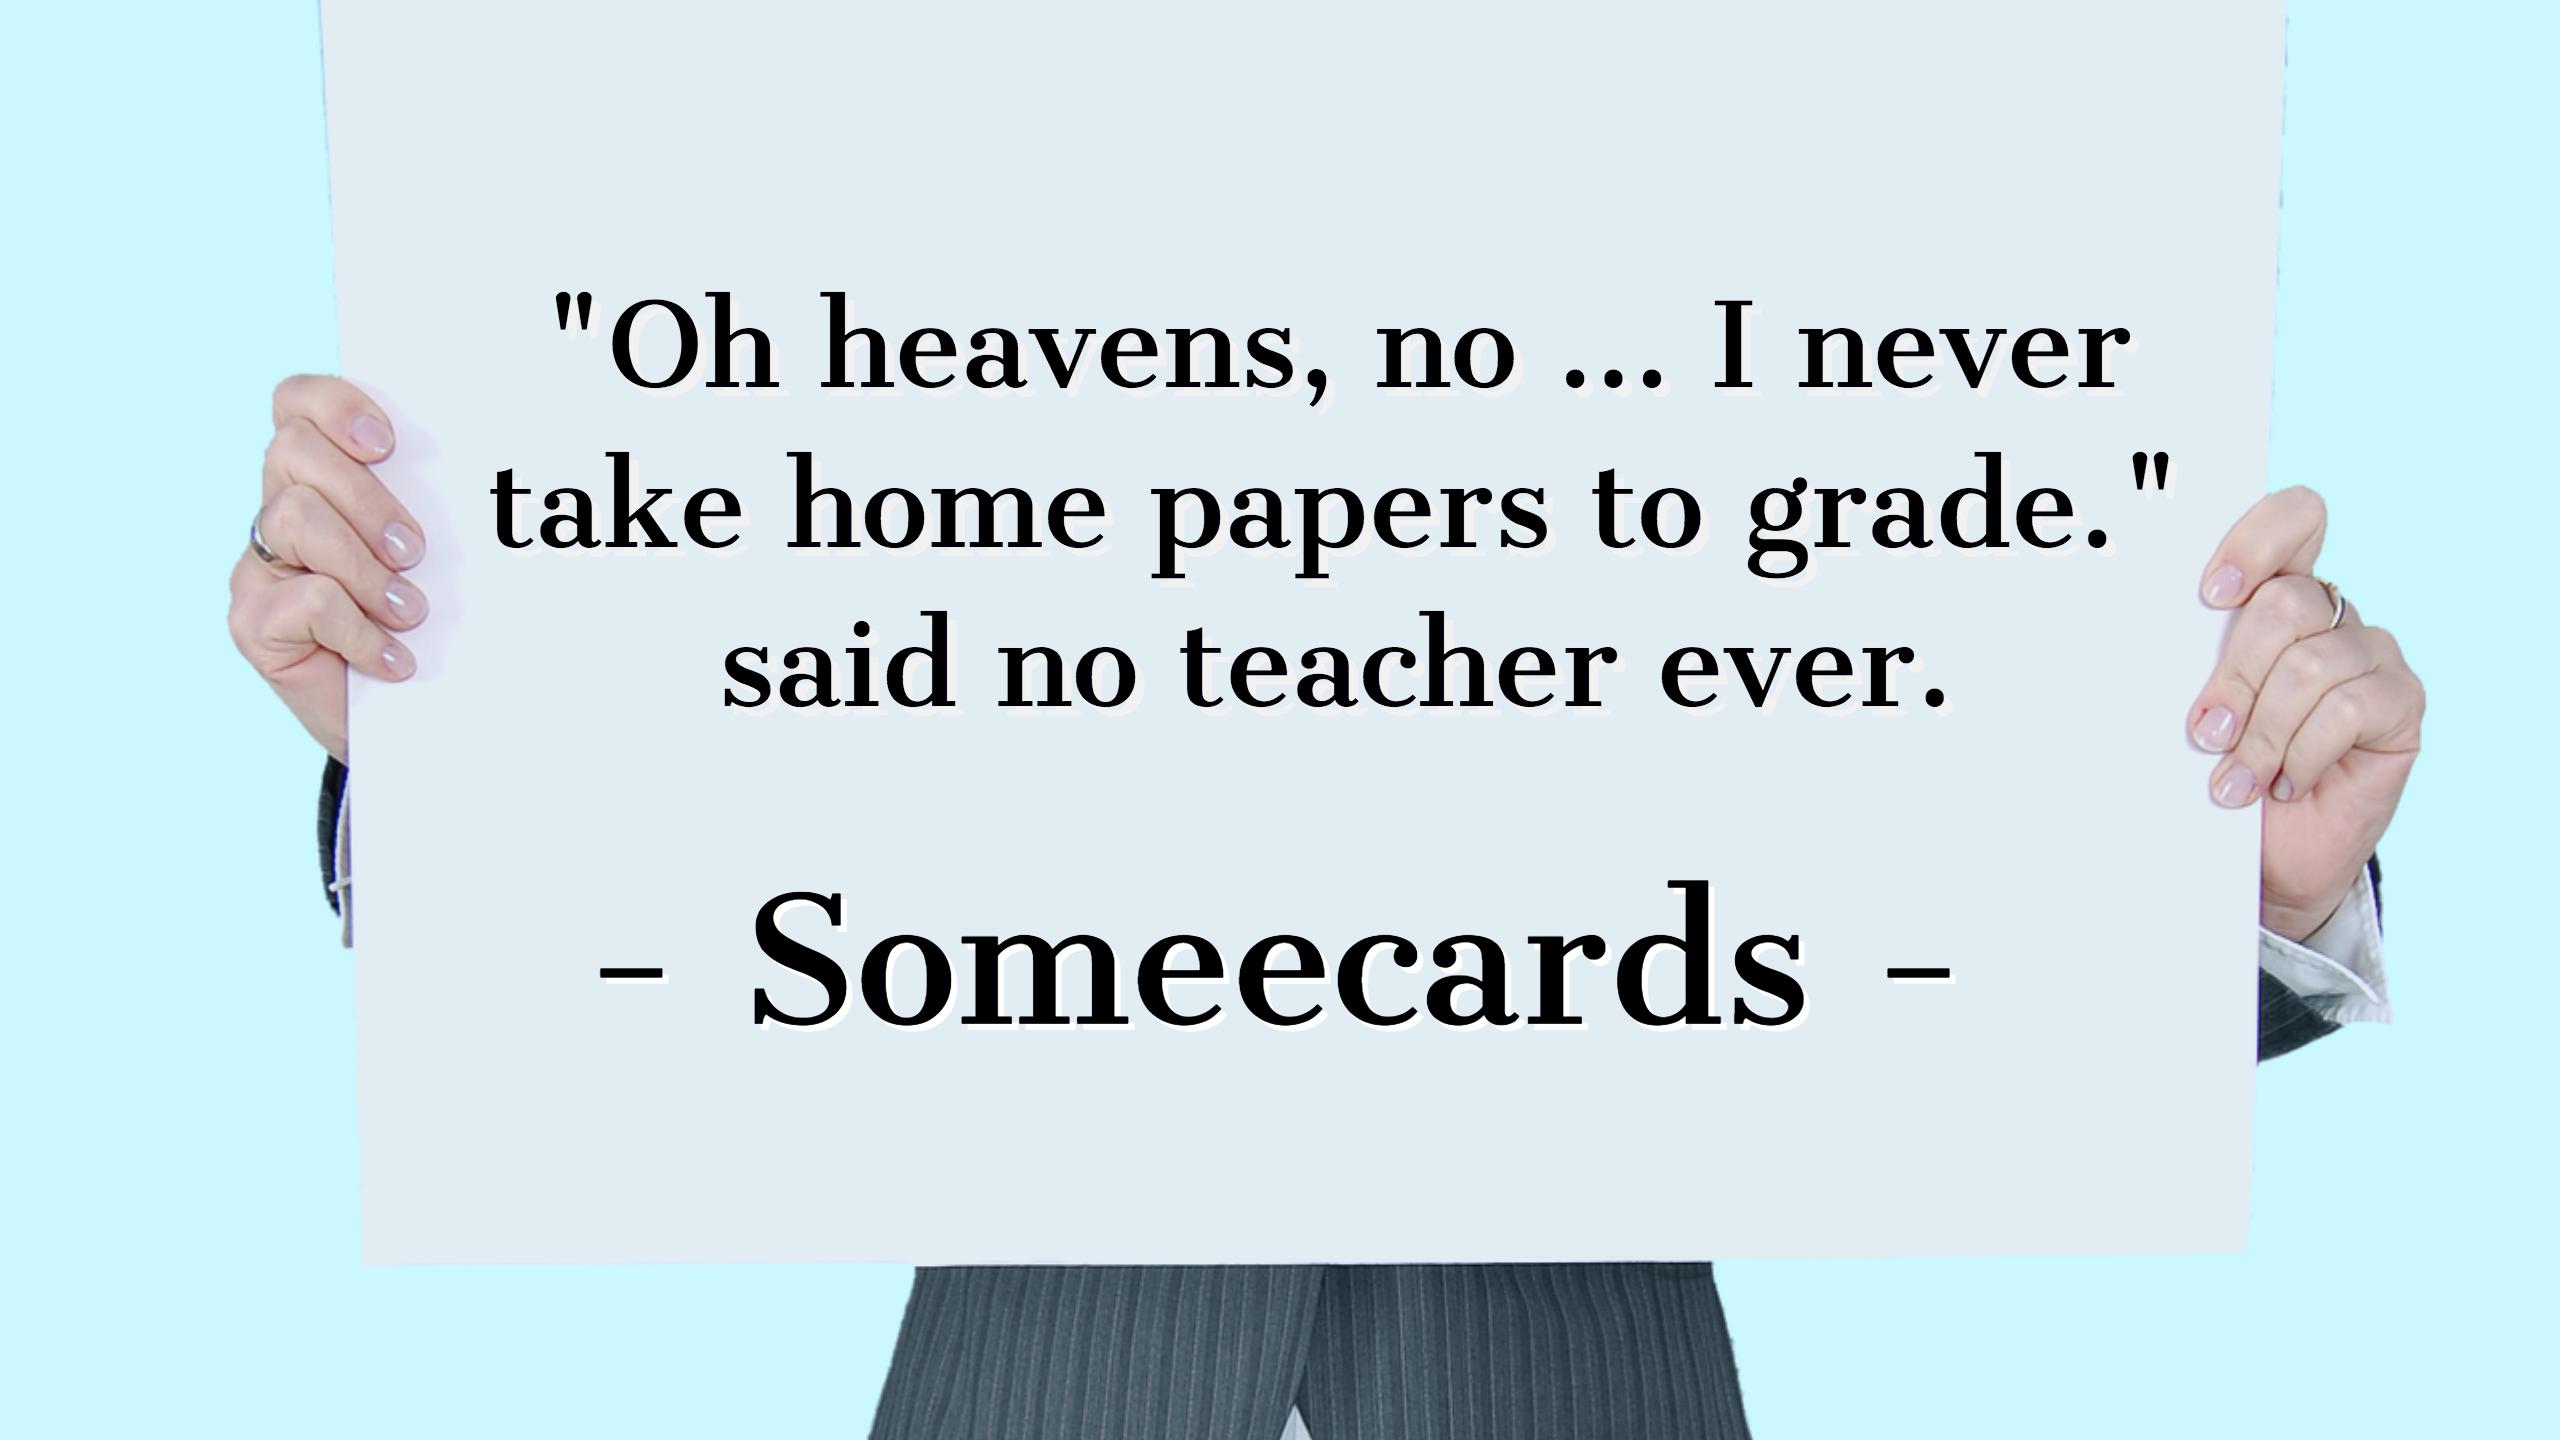 Quote about grading